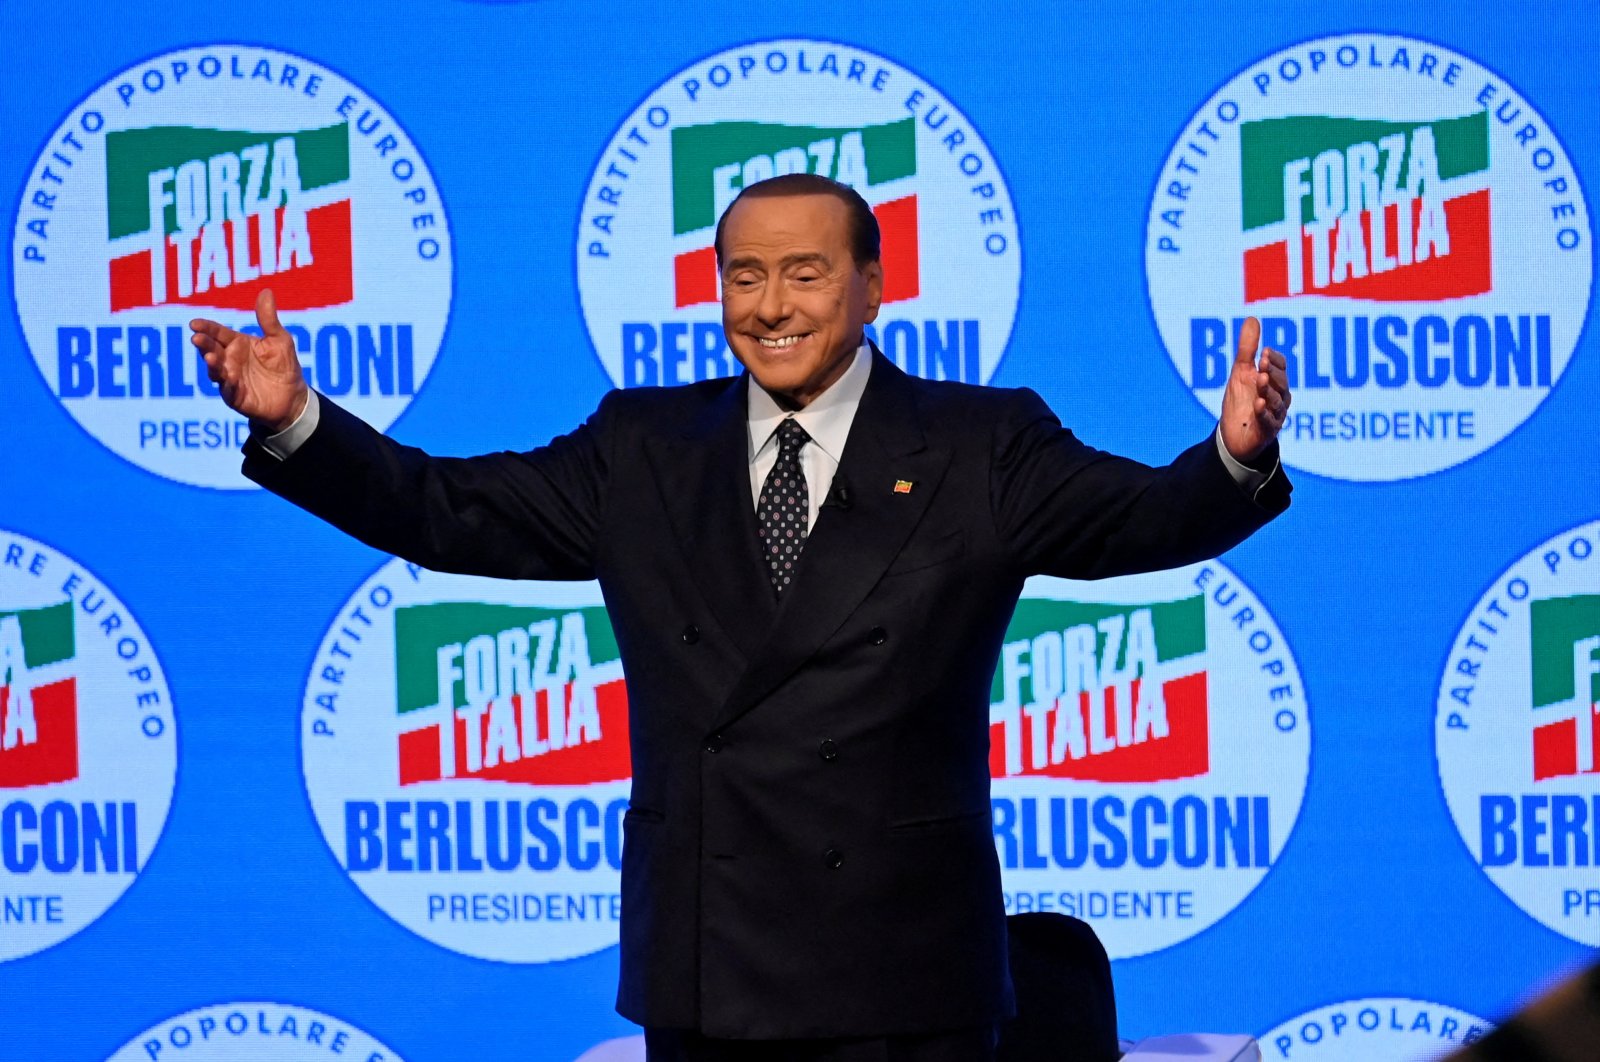 Forza Italia leader and former PM Silvio Berlusconi gestures during a meeting in Milan, Italy, Sept. 23, 2022. (Reuters Photo)